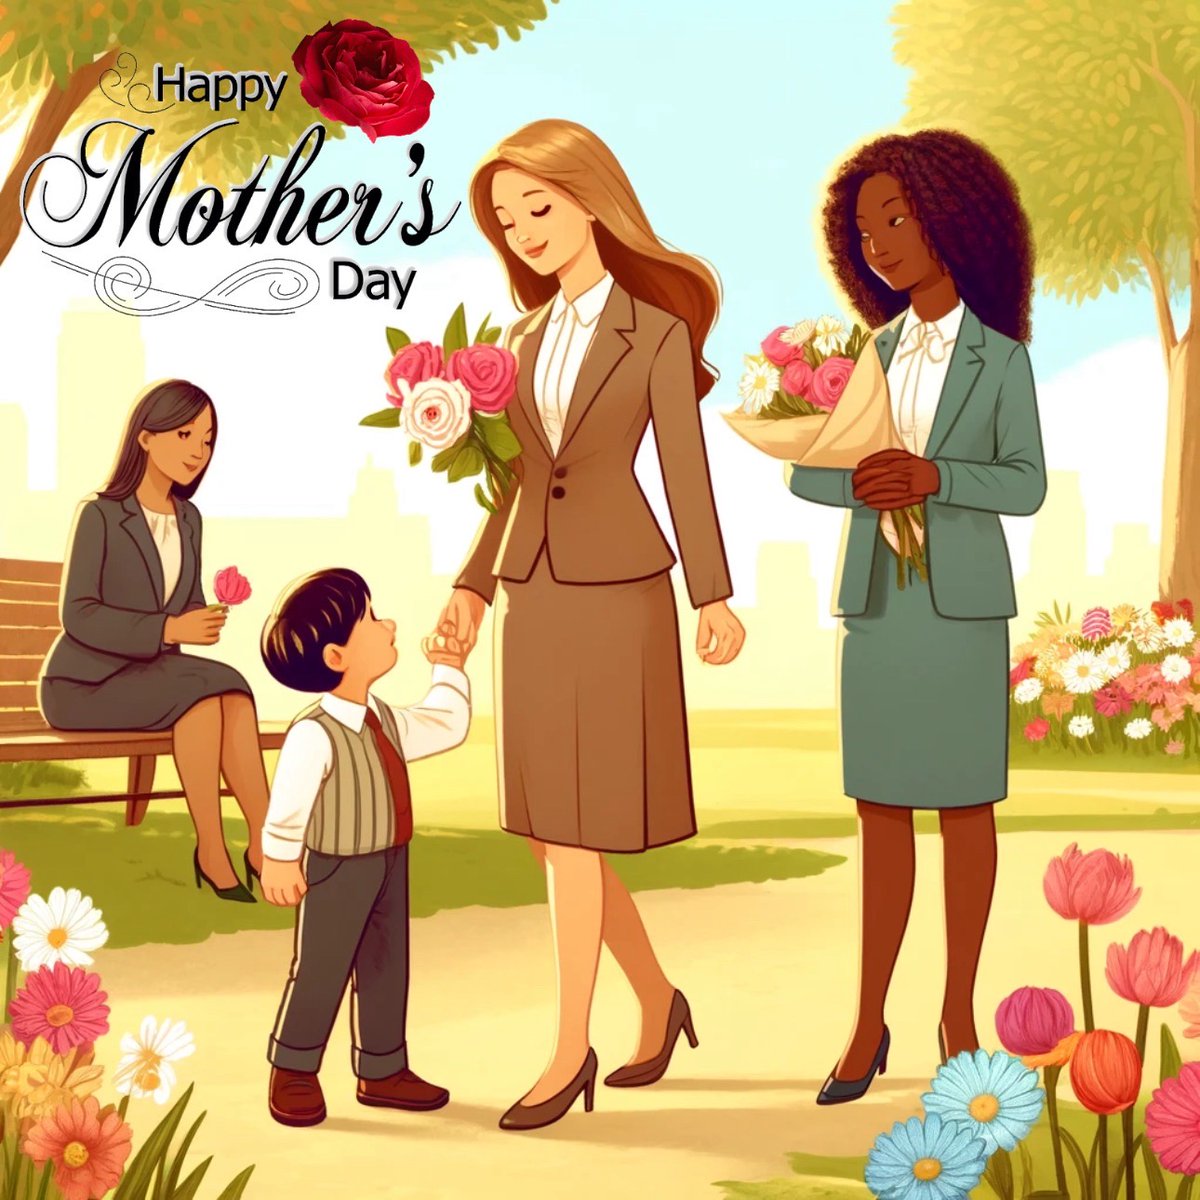 Today, we celebrate the incredible moms who nurture dreams and build the future. Your strength and wisdom inspire us every day. To all the entrepreneurial moms balancing business and family, you are the true architects of tomorrow.